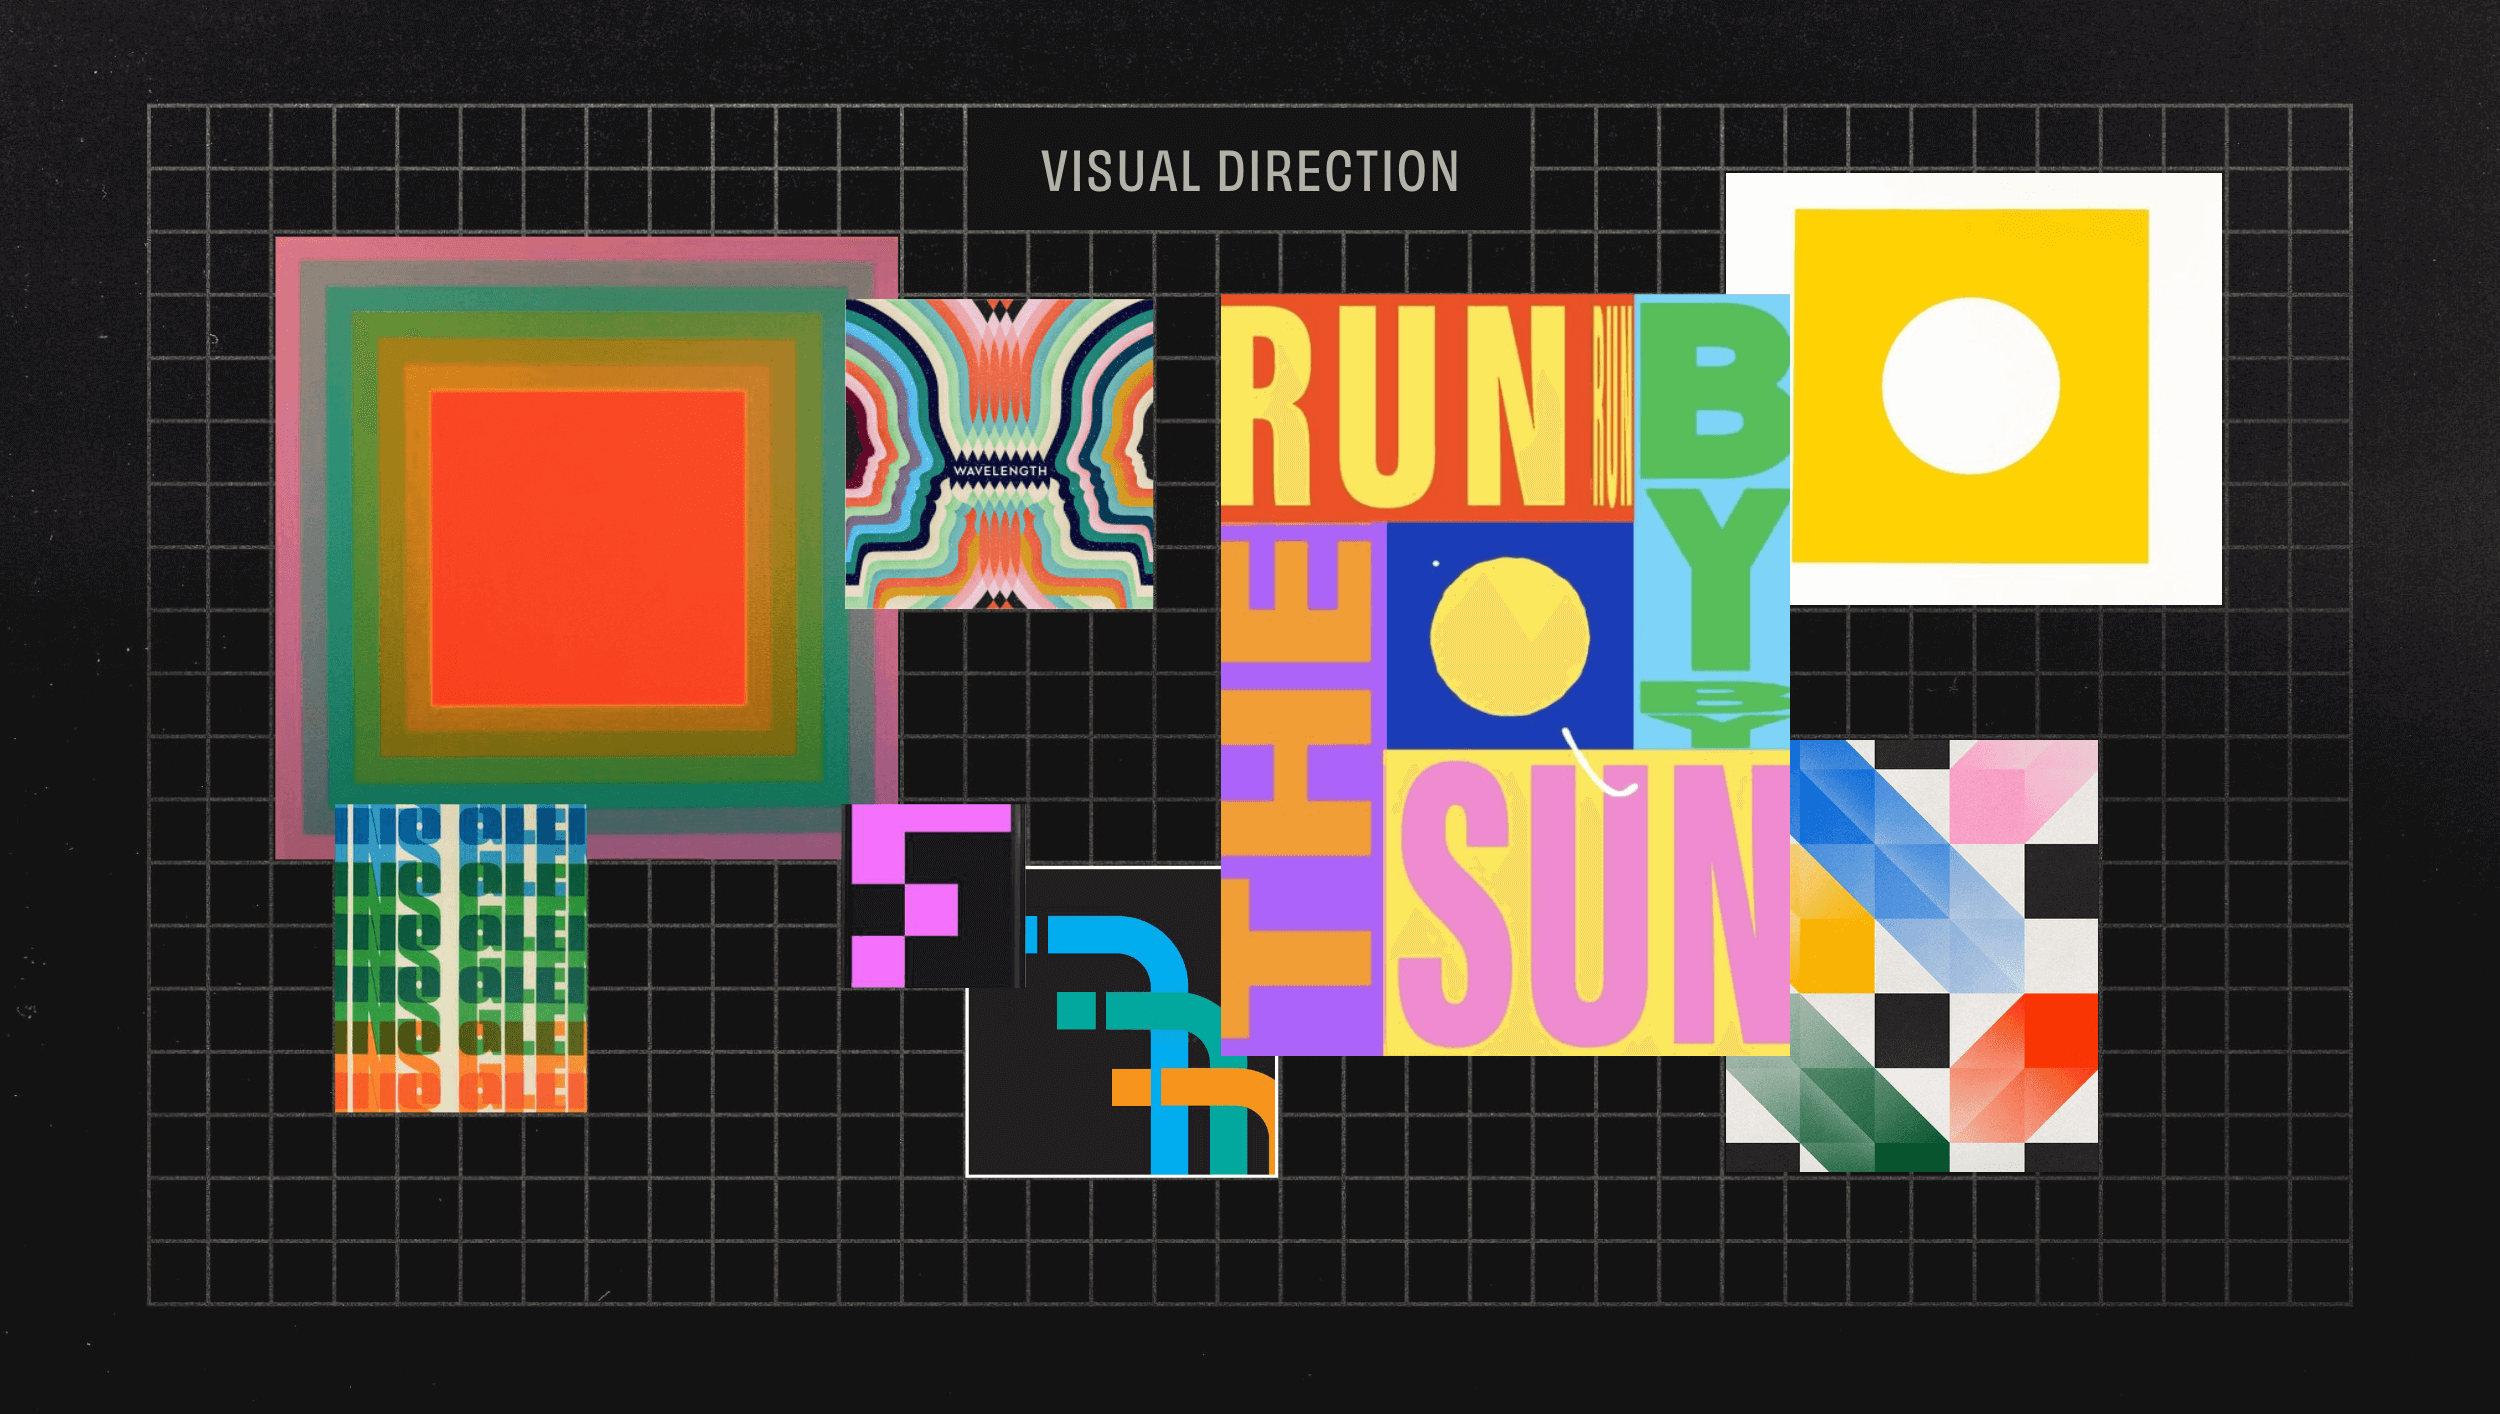 SIXEM visual direction featuring inspiration imagery pulled that sits on a grid background